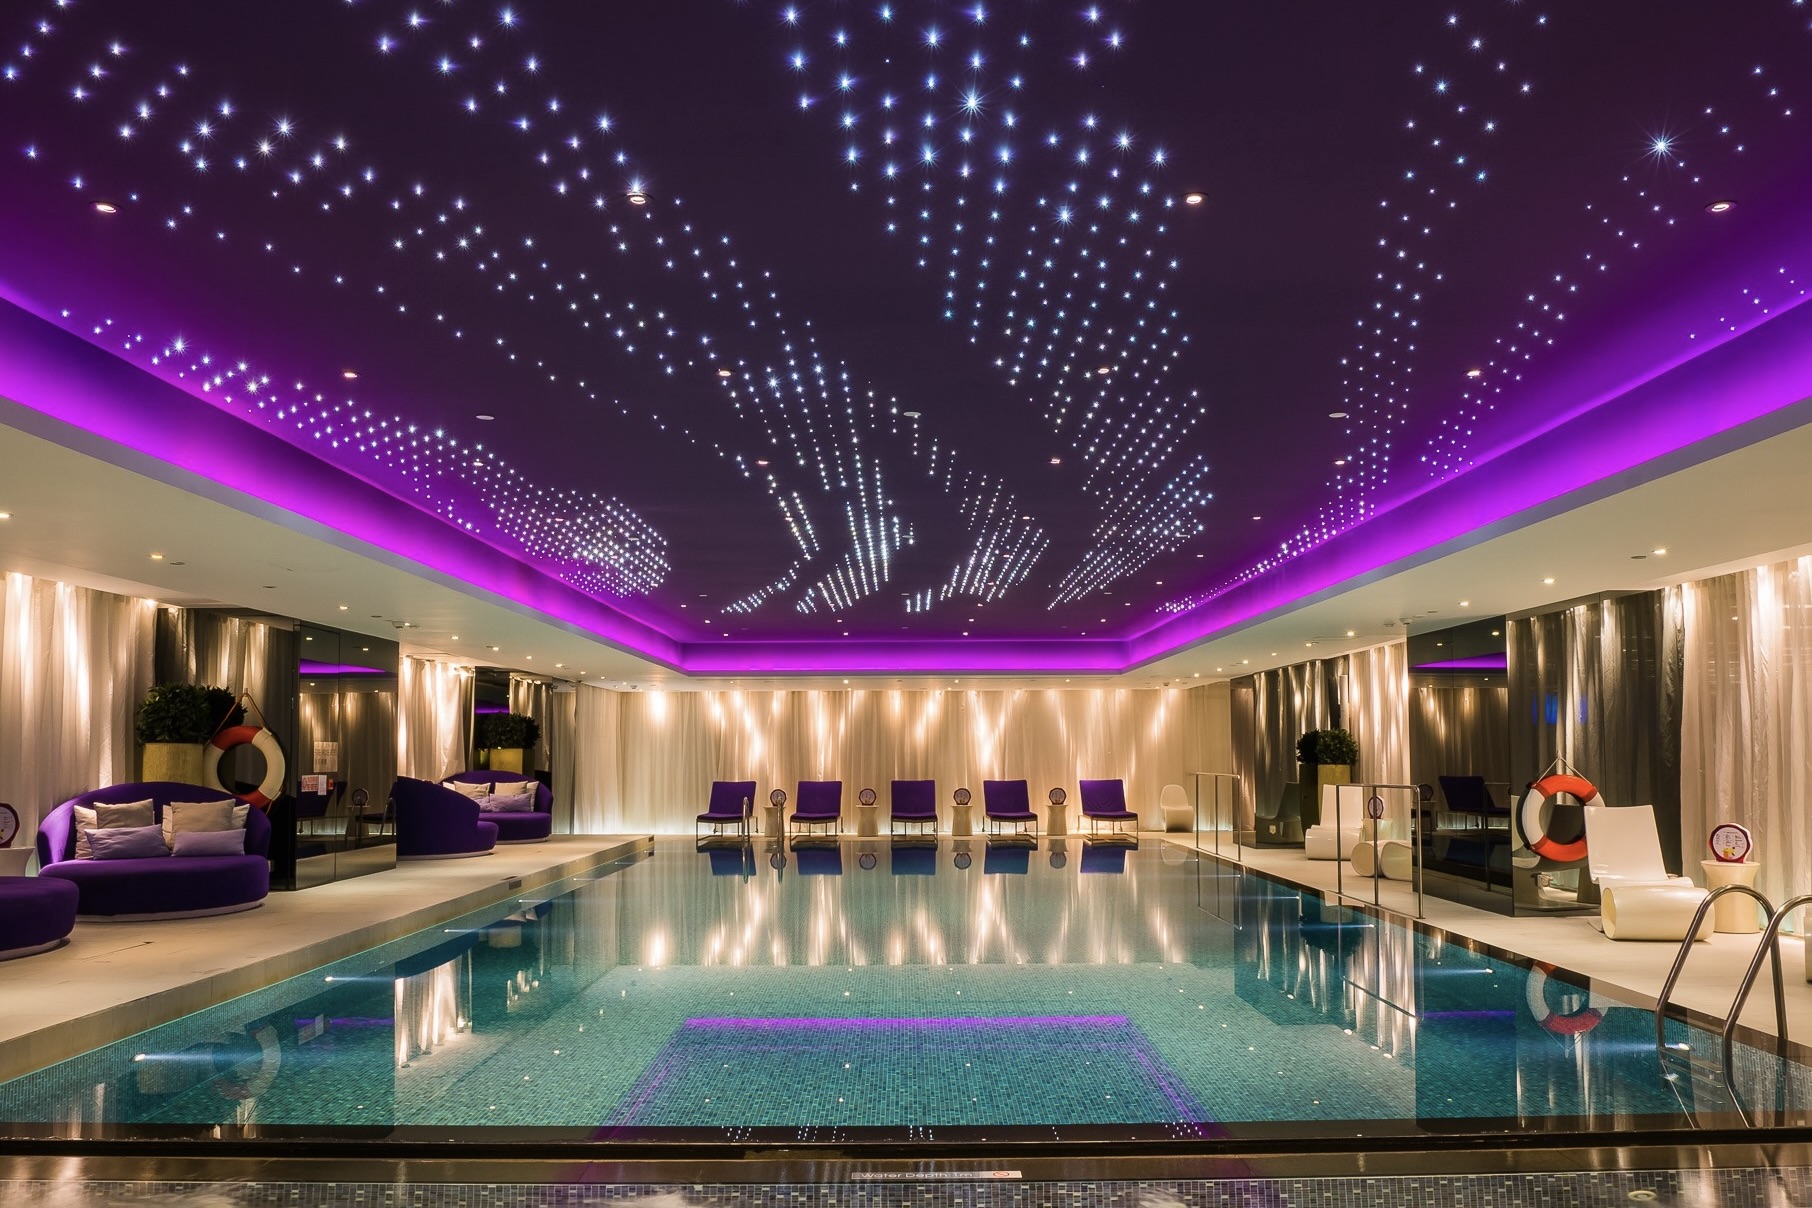 The indoor swimming pool at The Mira Hong Kong has an indoor lighting system that complements the ceiling lighting. The matching chaise lunges and sofas add to the air of elegance.